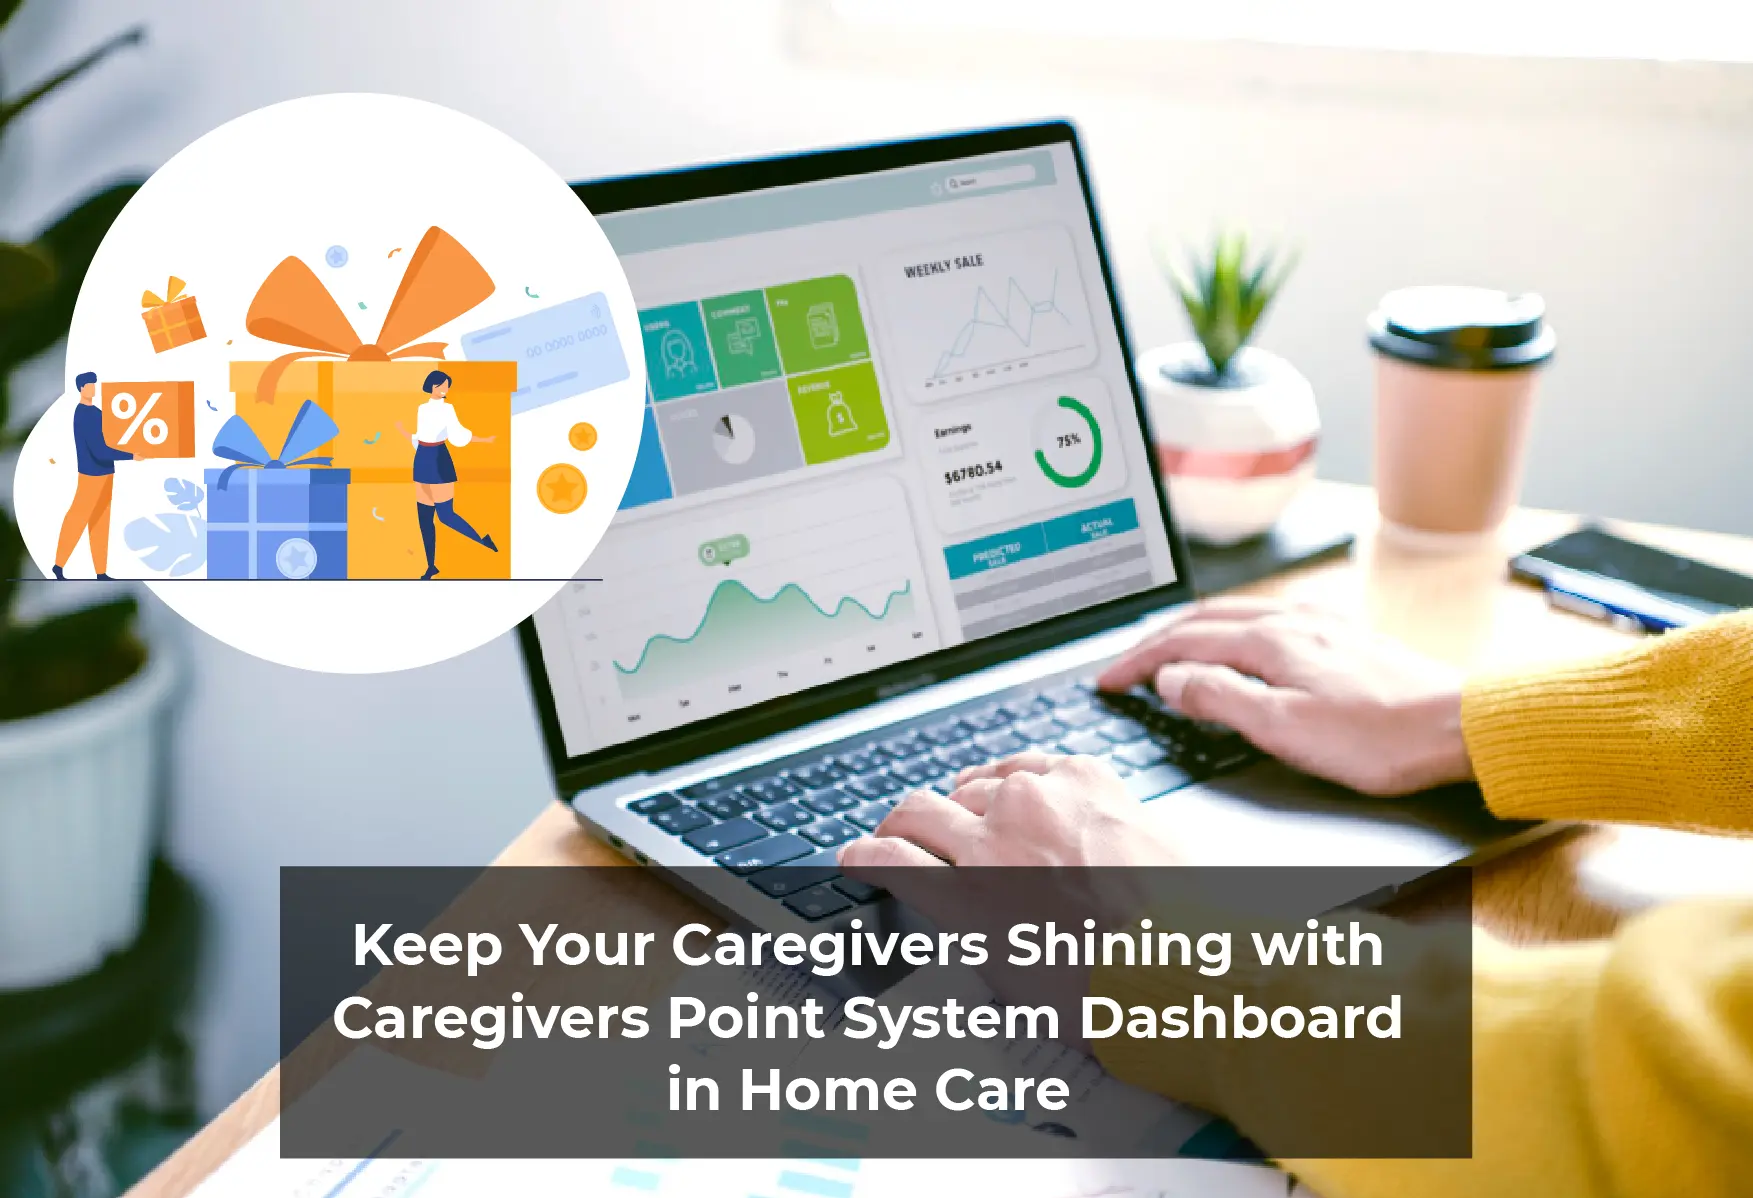 Caregivers Point System Dashboard in Home Care